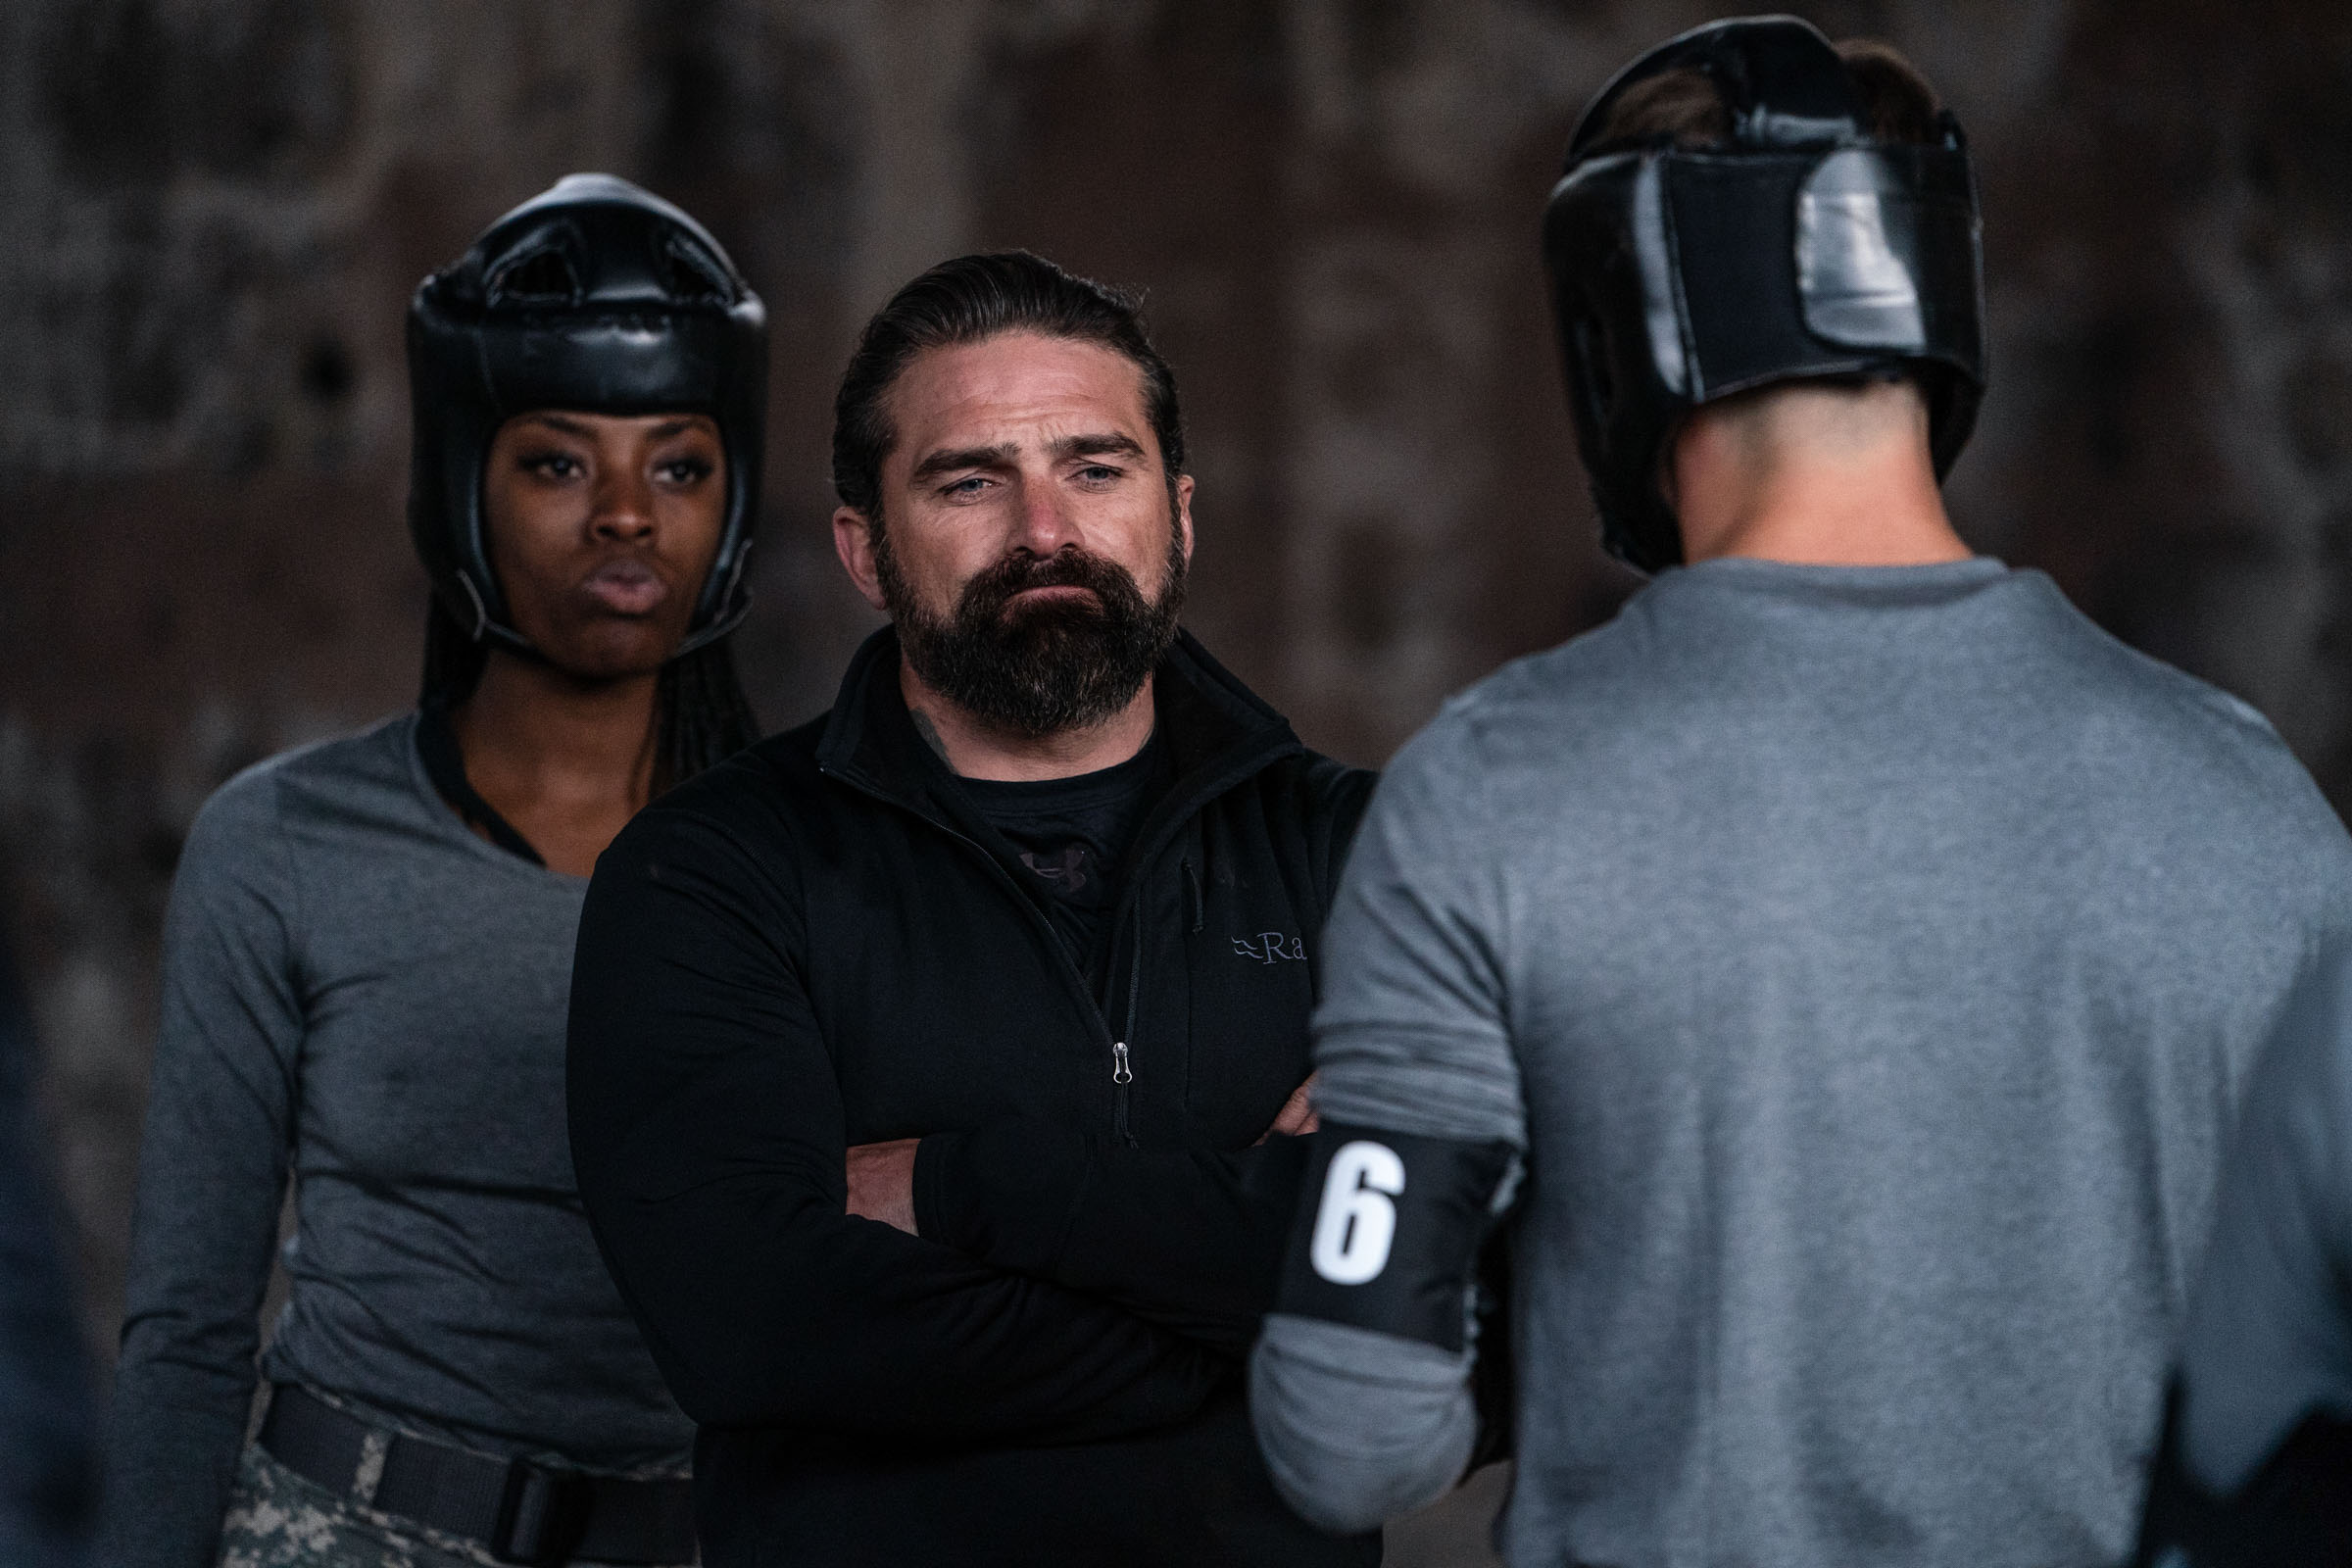  Chief Instructor Ant Middleton AjJ Odudu and Jeremy Irvine during the 2 vs 1 boxing  Episode 1 - Courage  Minnow Films / Channel 4 